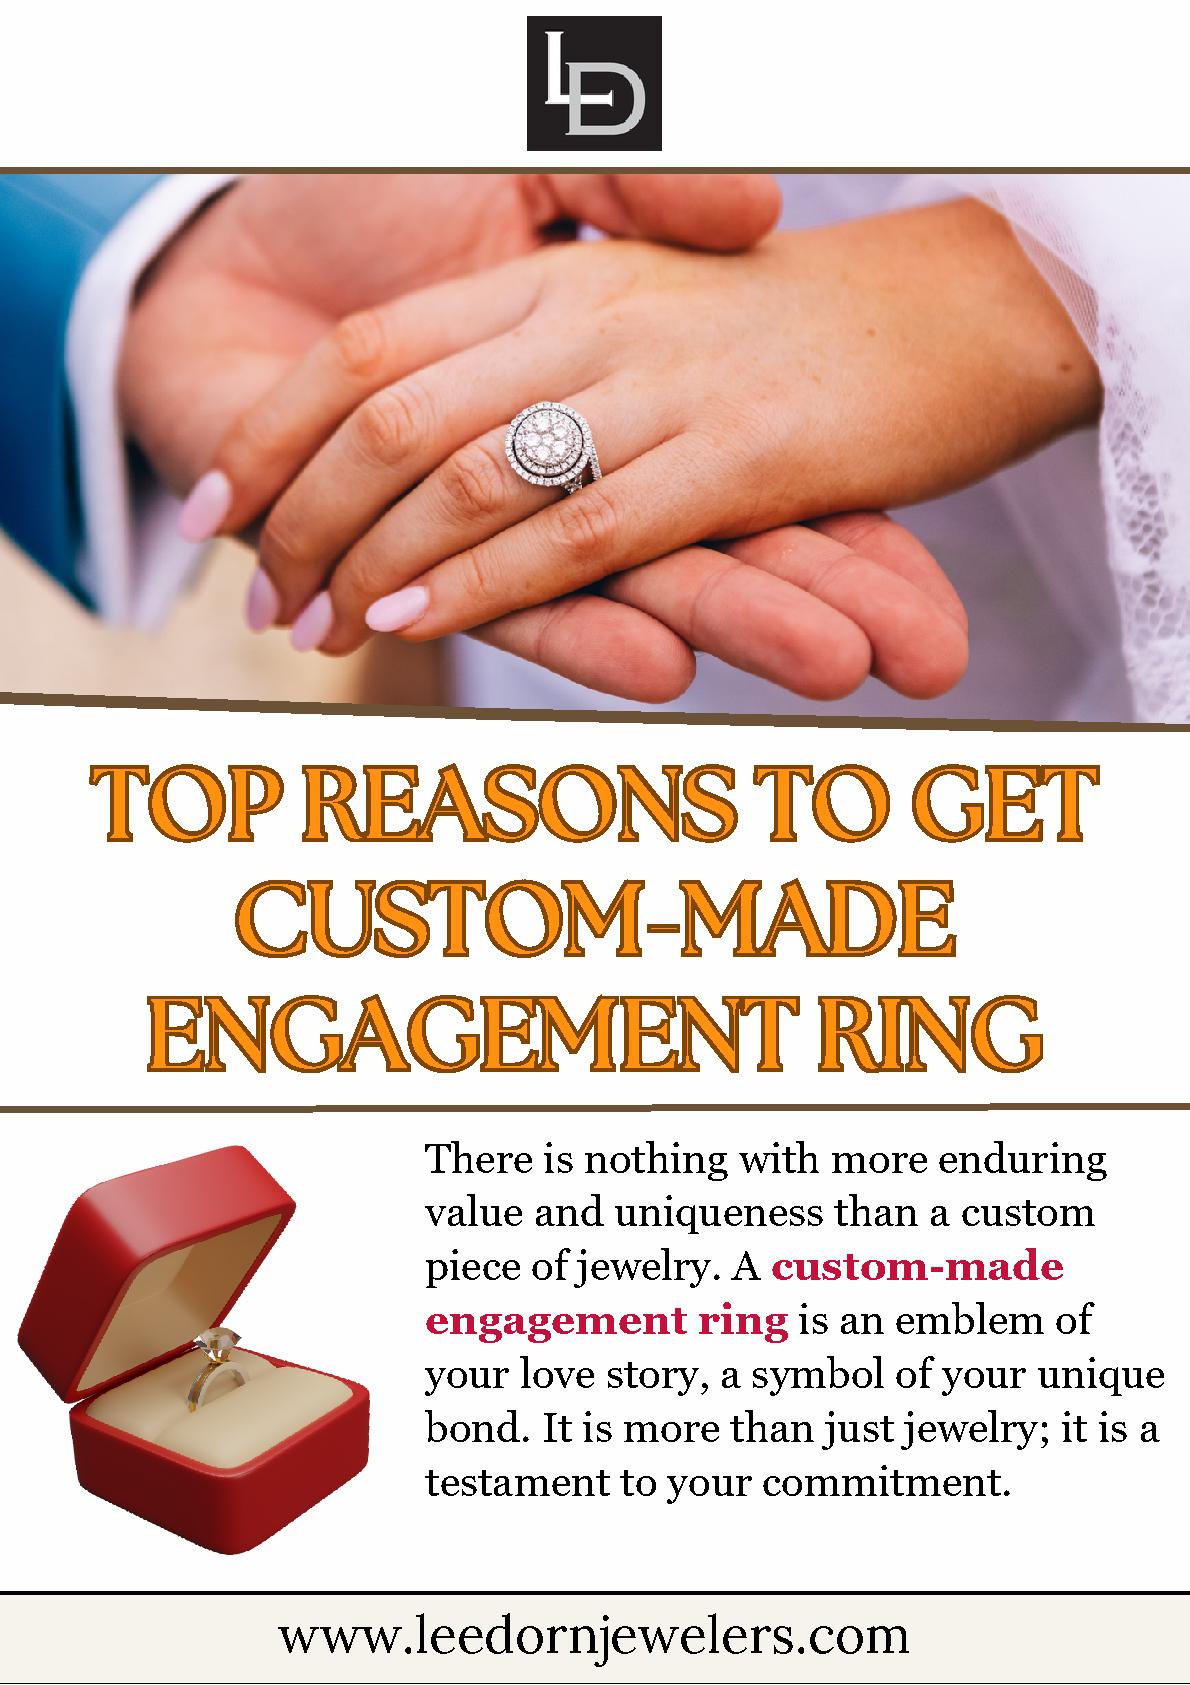 Top Reasons to Get Custom-Made Engagement Ring.pdf